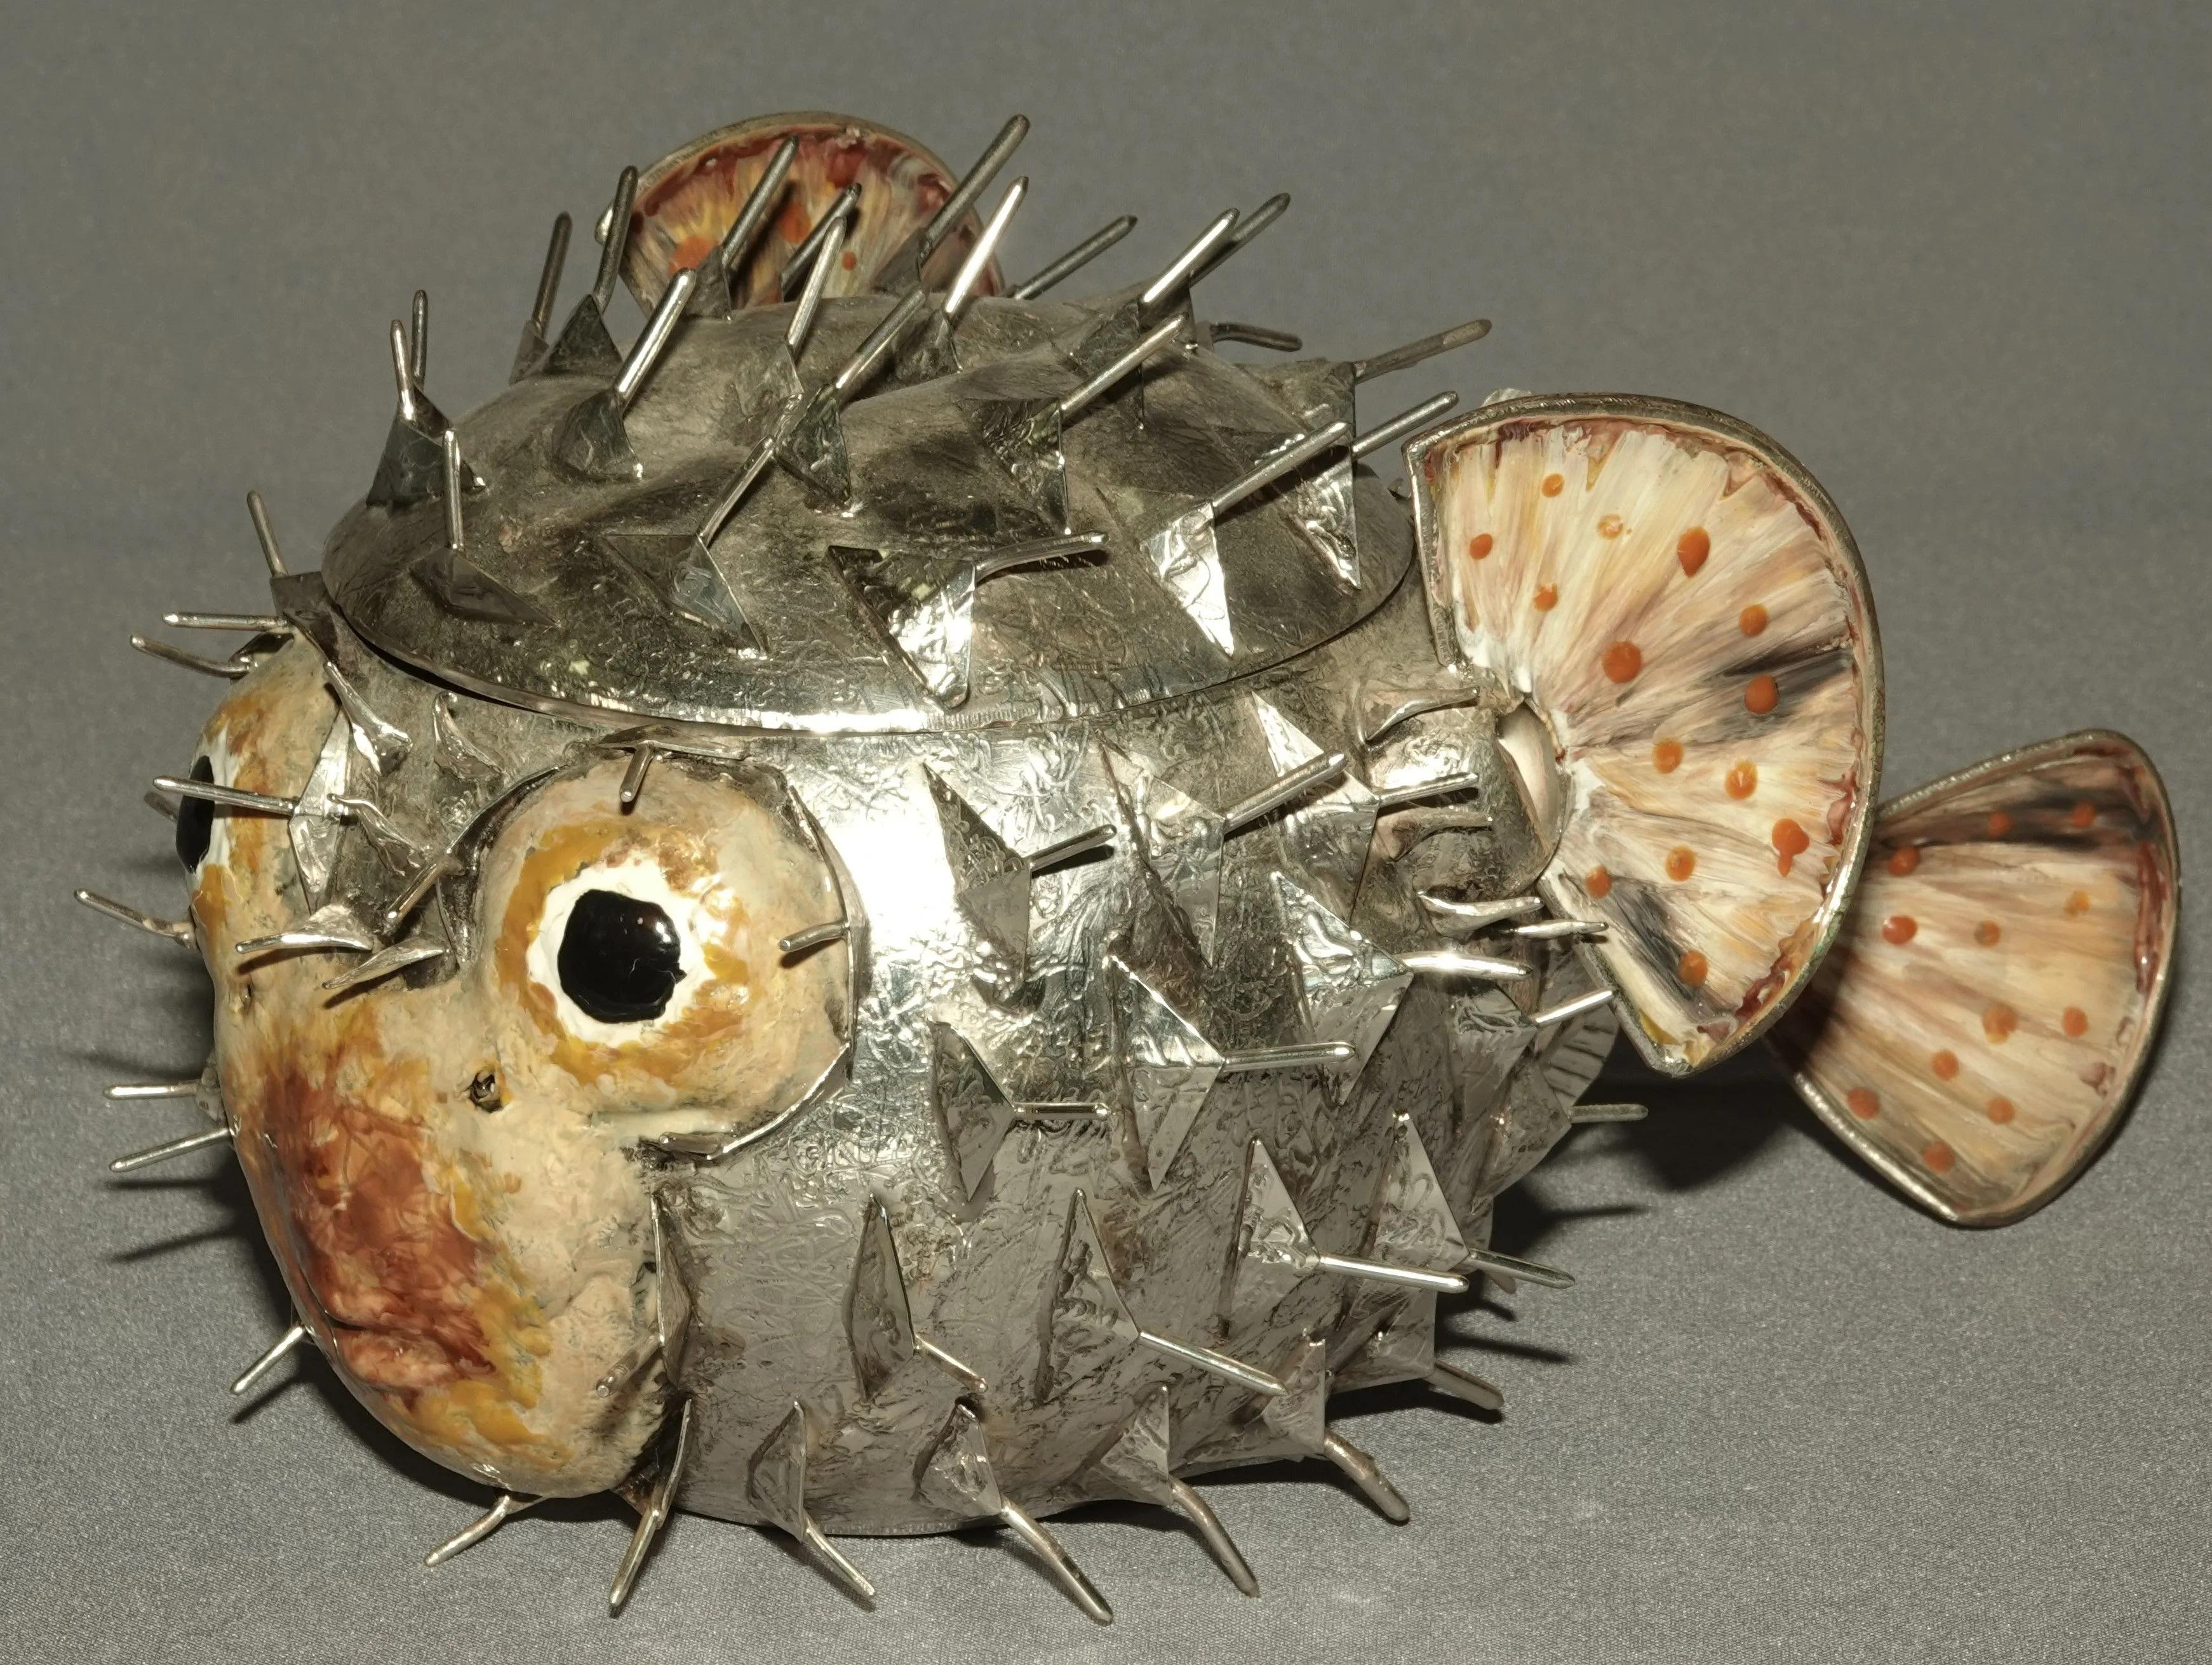 Rare 20th italian Sterling Silver caviar dish / bowl

In the shape of a puffer fish with enamel, with a glass bowl

Hallmark 925

Measures: Weight without glass: 1072 grams 
Height 15 cm - 5.9 inches
Length: 29 cm - 11.4 inches
cm